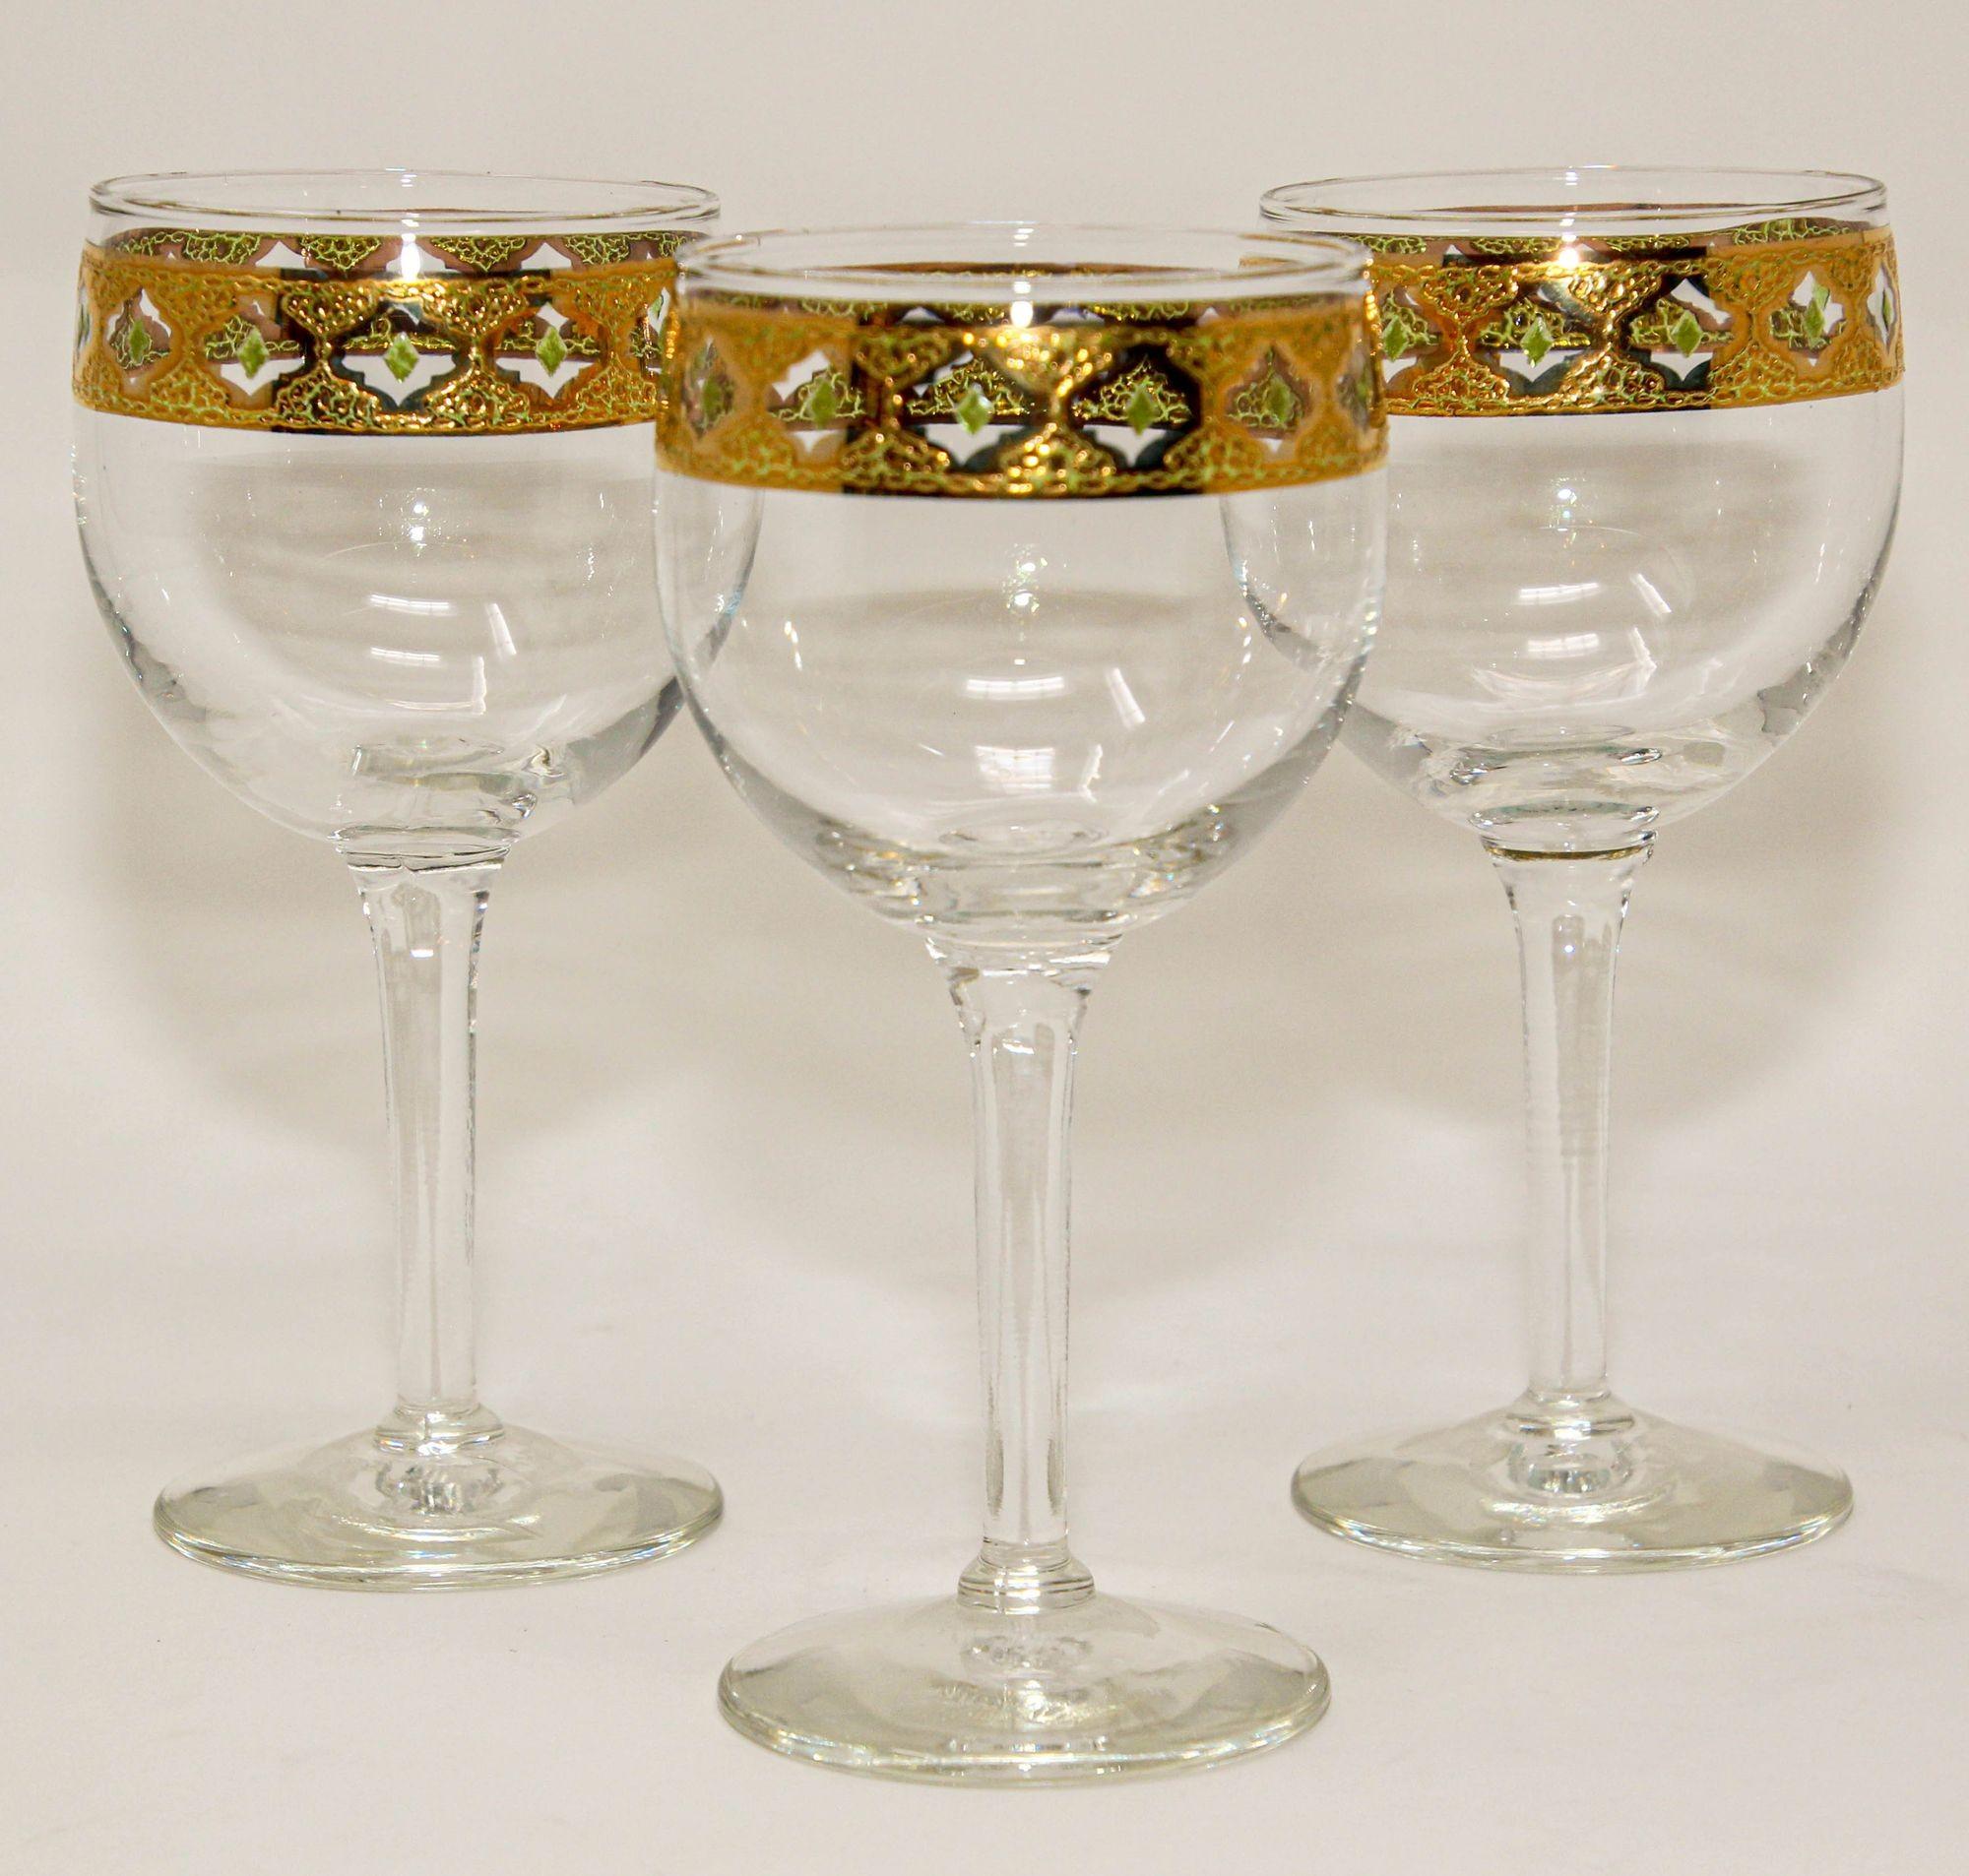 Set of 3 Vintage Culver Ltd Wine Glasses with 22-Karat Gold Tyrol Pattern.
Set of 3 Vintage Culver Ltd rim banding wine glasses with 22-karat gold Tyrol pattern design.
Measures: Height 6 in. x Diameter 2.75 in.
Barware glasses with gold